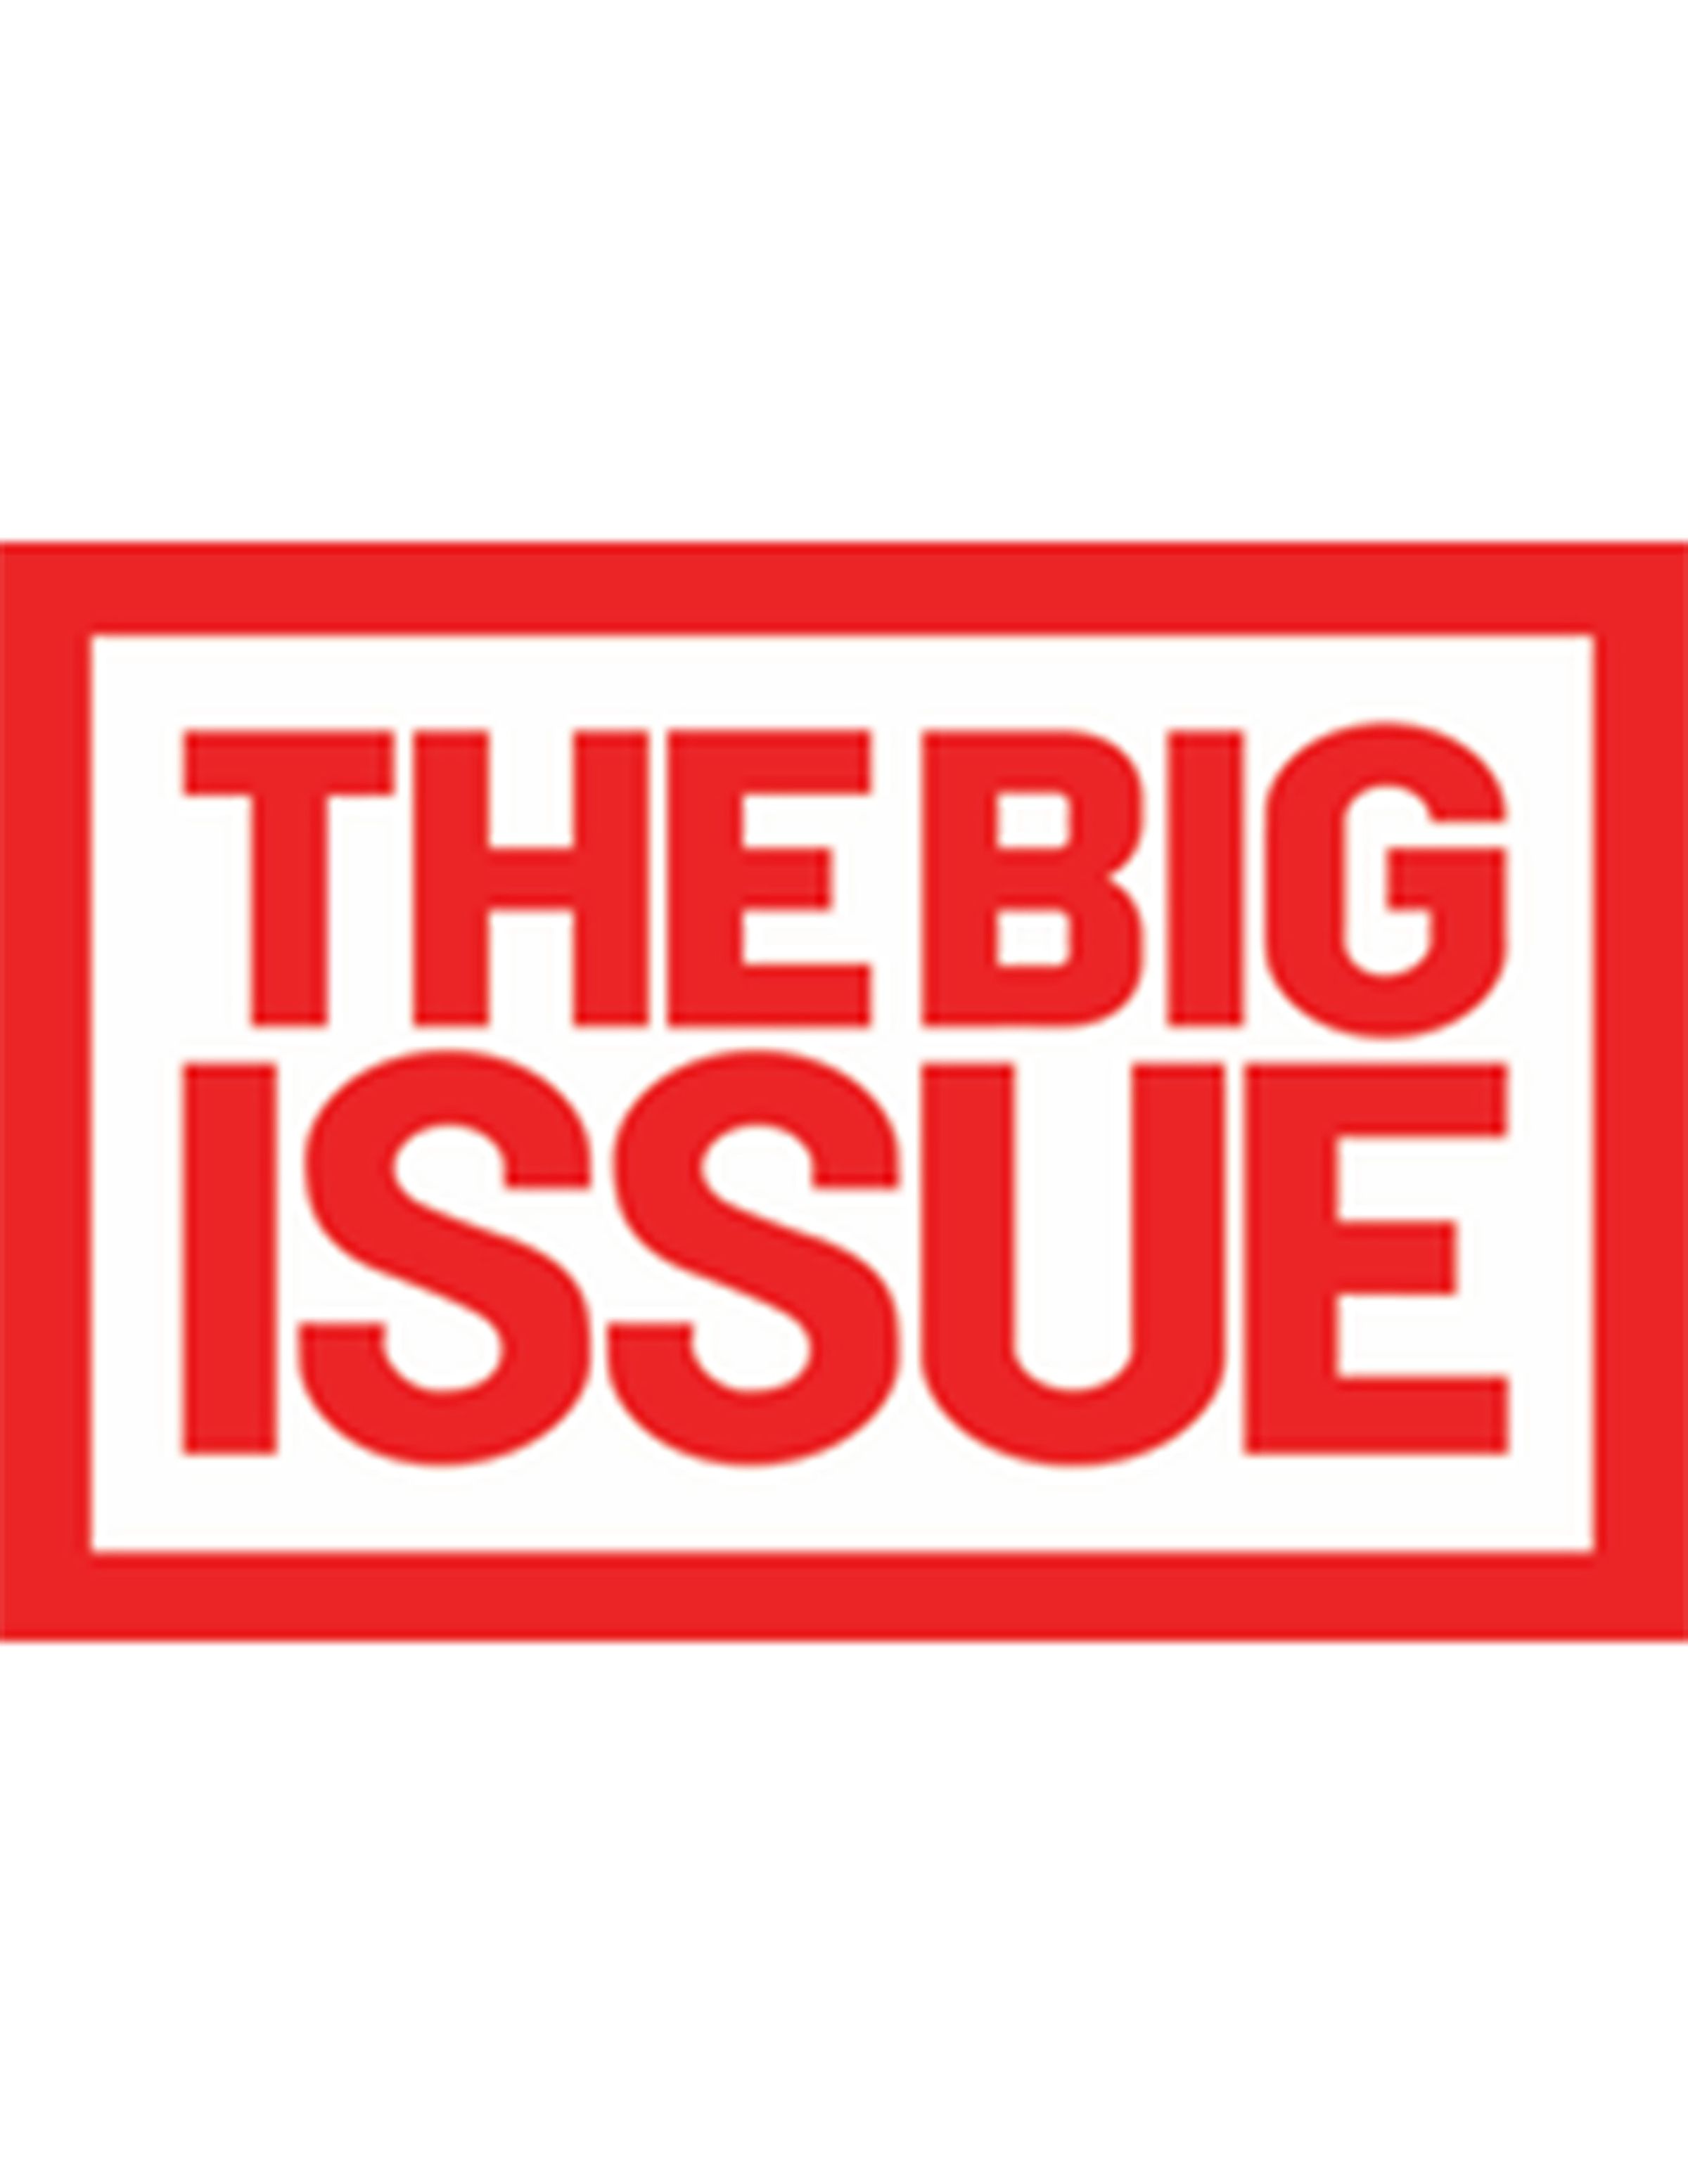 A red and white logo with large block text in red capital letters reading THE BIG ISSUE in a red rectangle frame